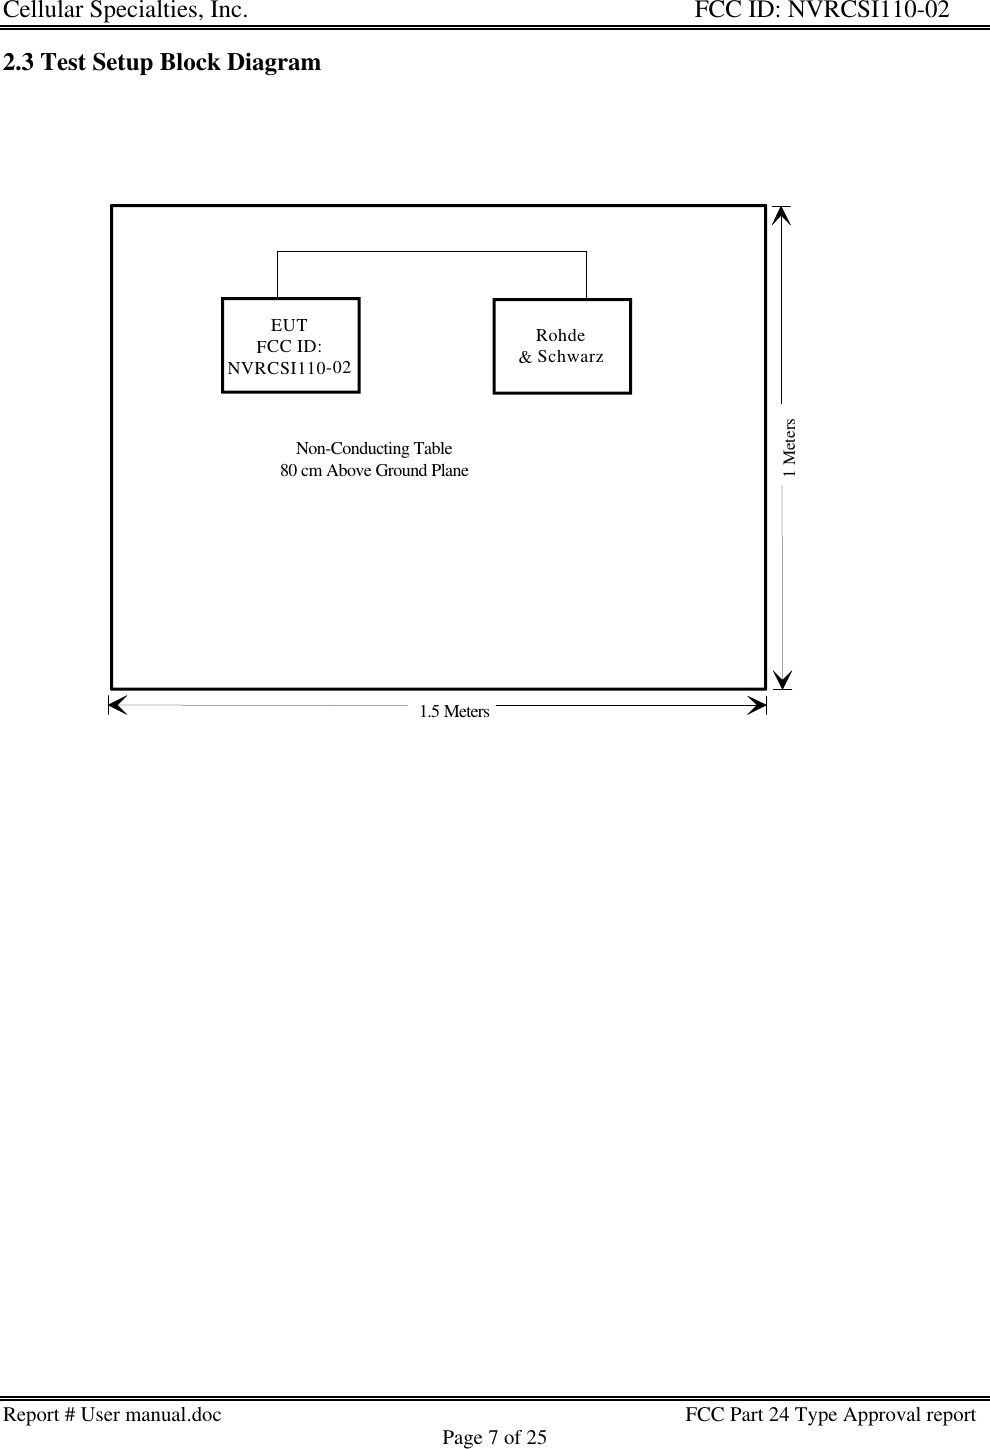 Cellular Specialties, Inc. FCC ID: NVRCSI110-02Report # User manual.doc                                                                                         FCC Part 24 Type Approval reportPage 7 of 252.3 Test Setup Block Diagram1.5 MetersNon-Conducting Table80 cm Above Ground Plane1 MetersEUTFCC ID:NVRCSI110-02Rohde &amp; Schwarz